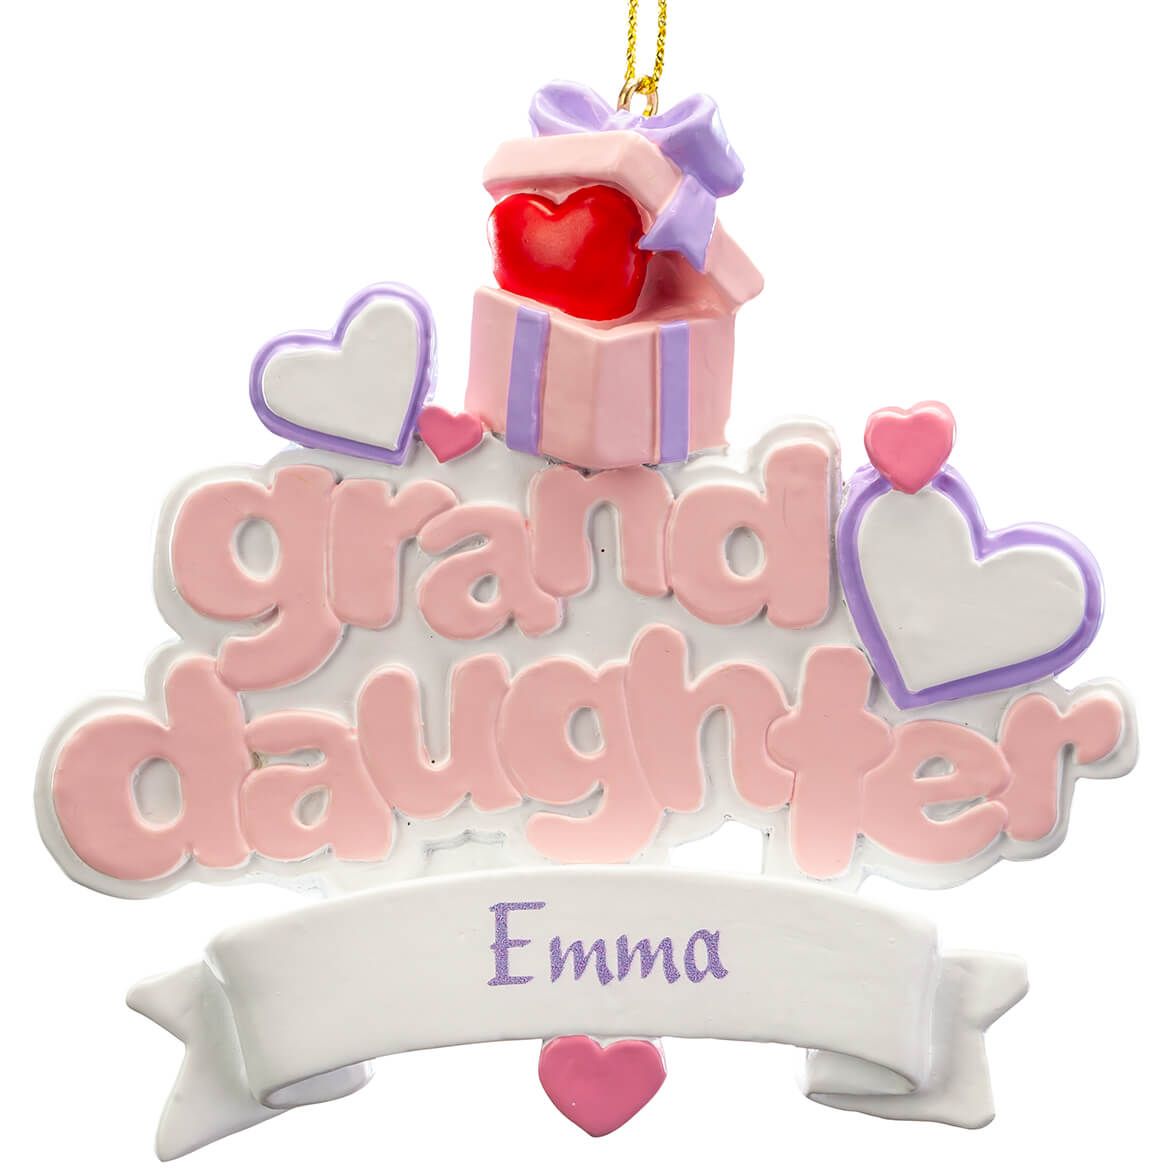 Personalized Granddaughter Ornament + '-' + 368191